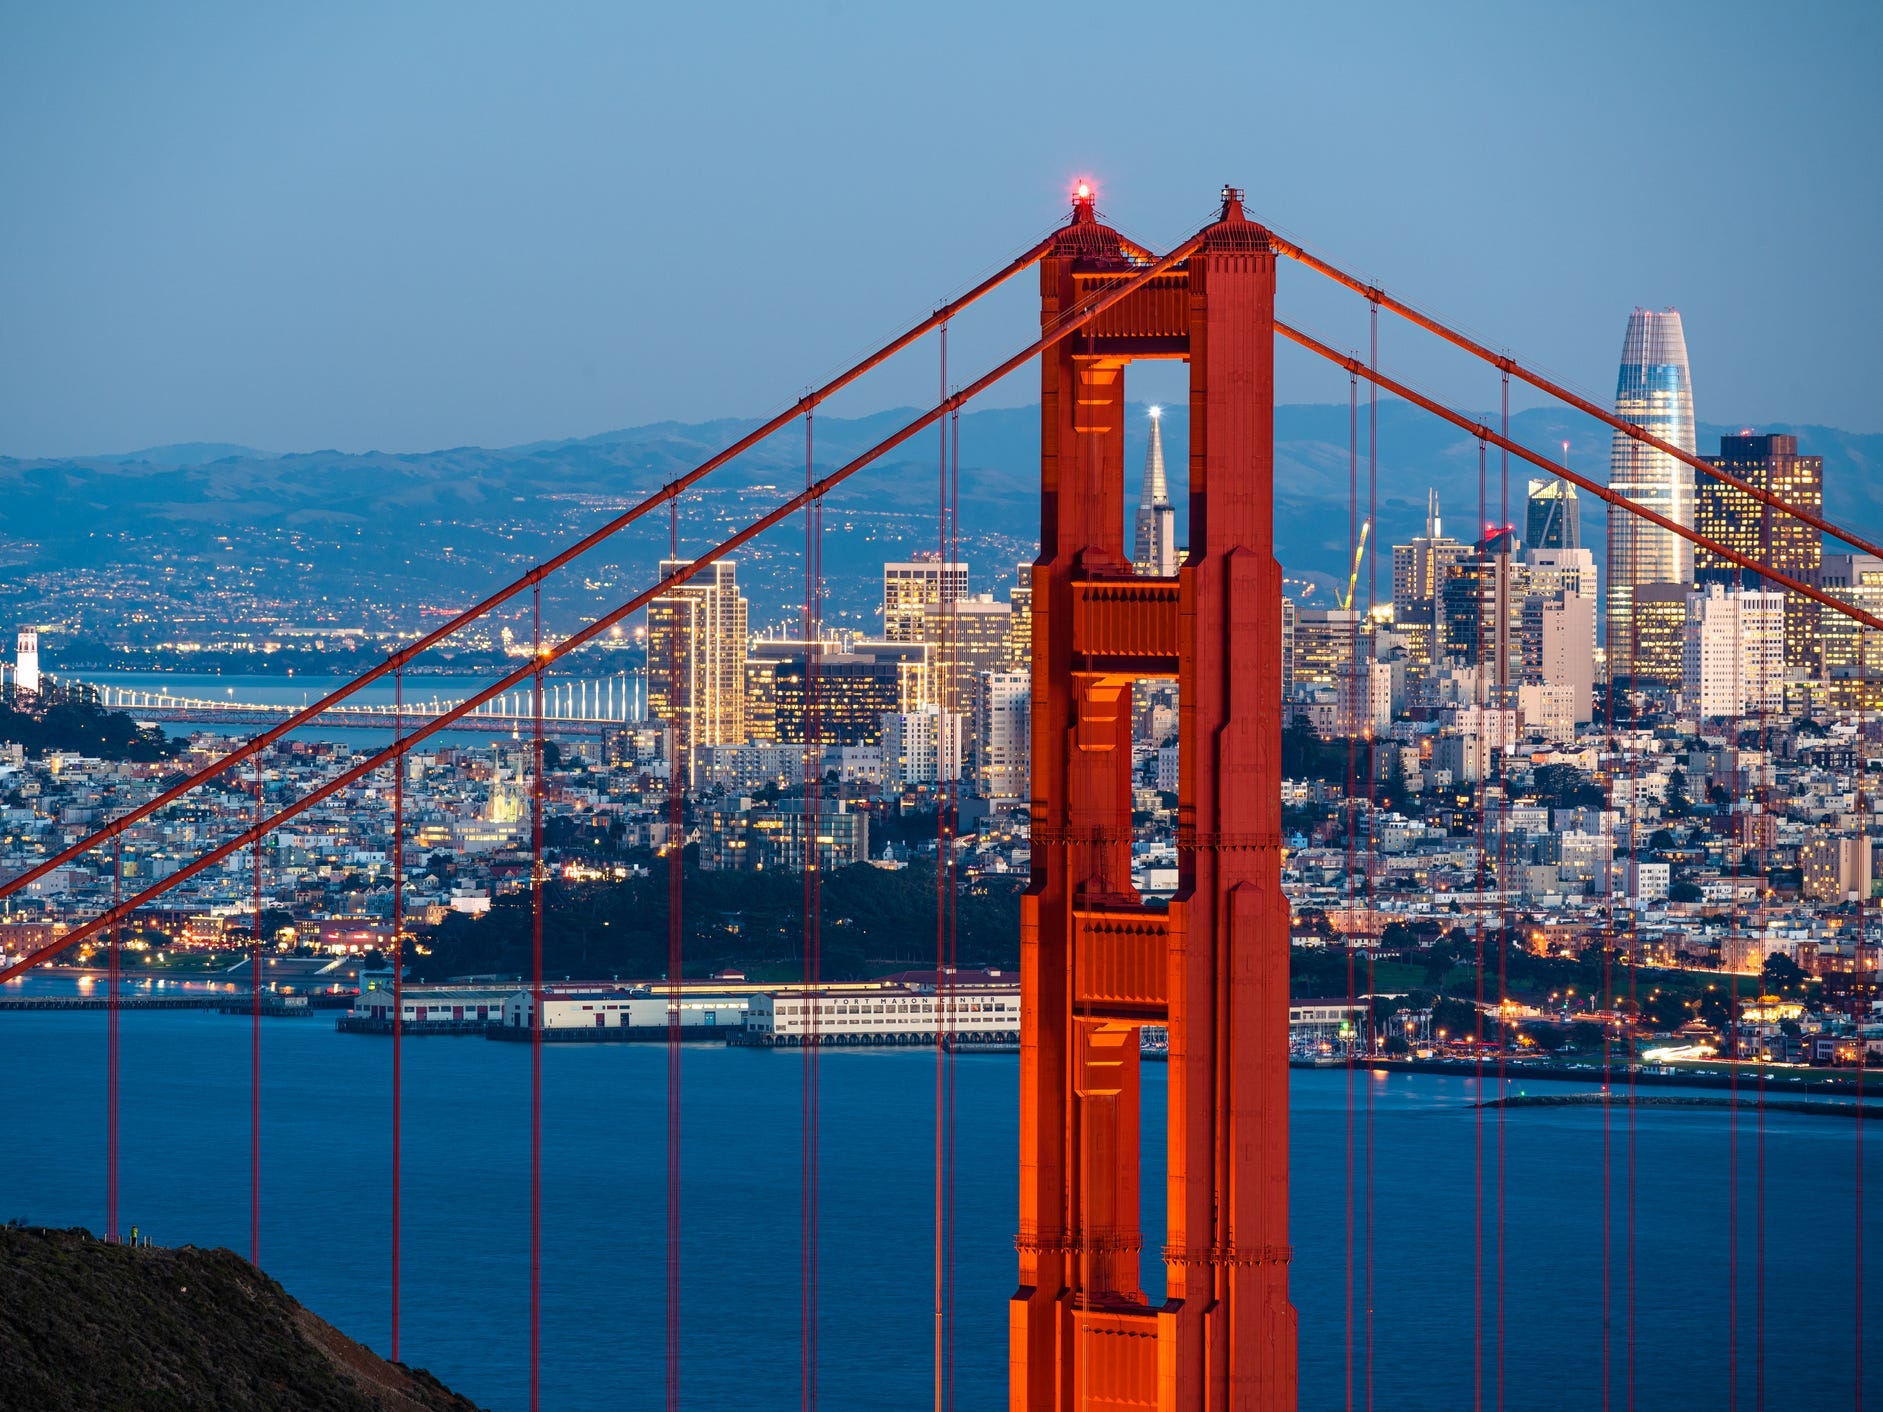 A view of the San Francisco skyline, showcasing the Golden Gate Bridge and the Salesforce Tower.